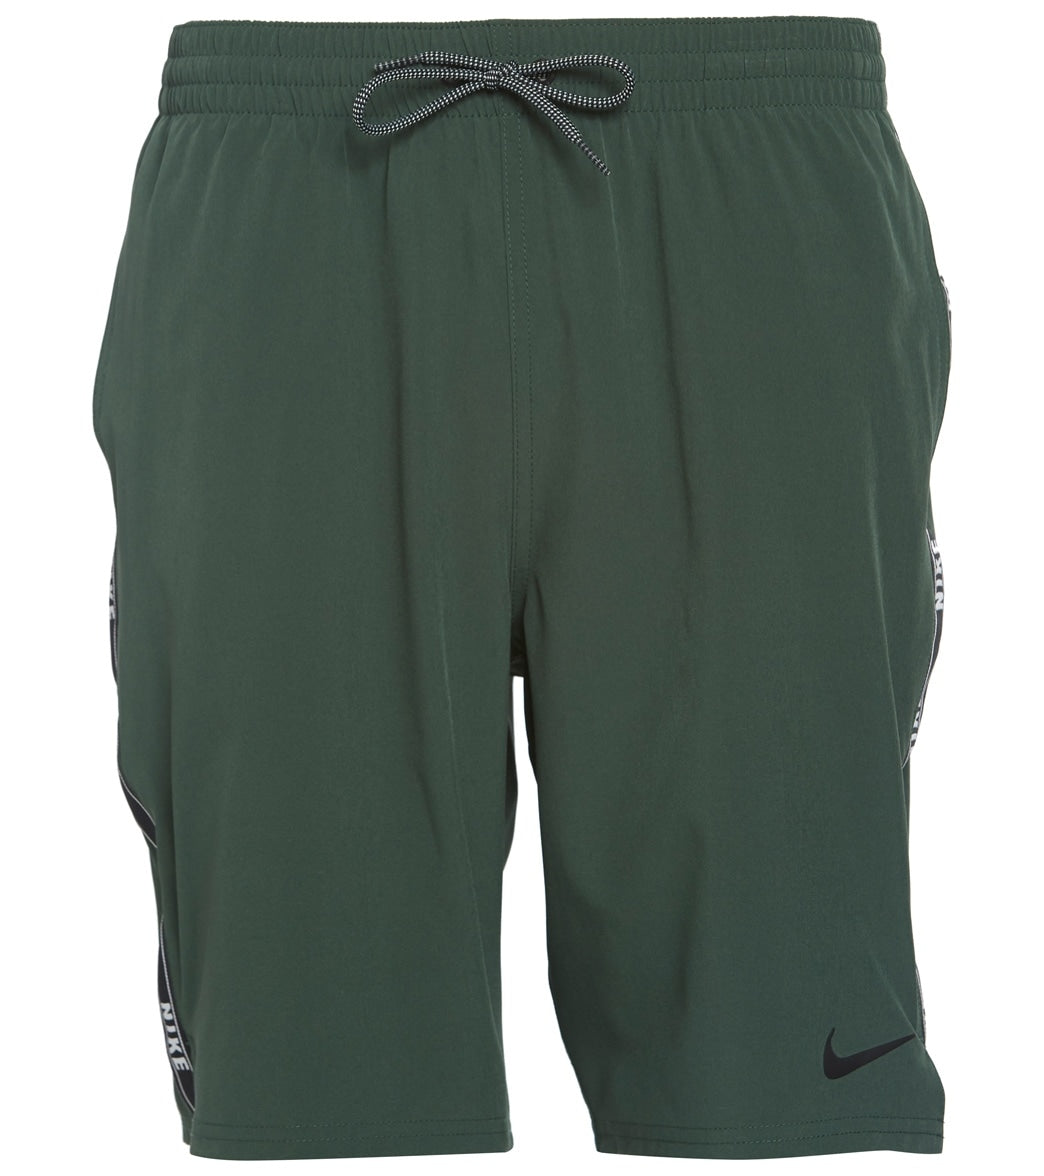 Nike Men's 20 Logo Tape Racer Volley Short - Galactic Jade Small Polyester - Swimoutlet.com